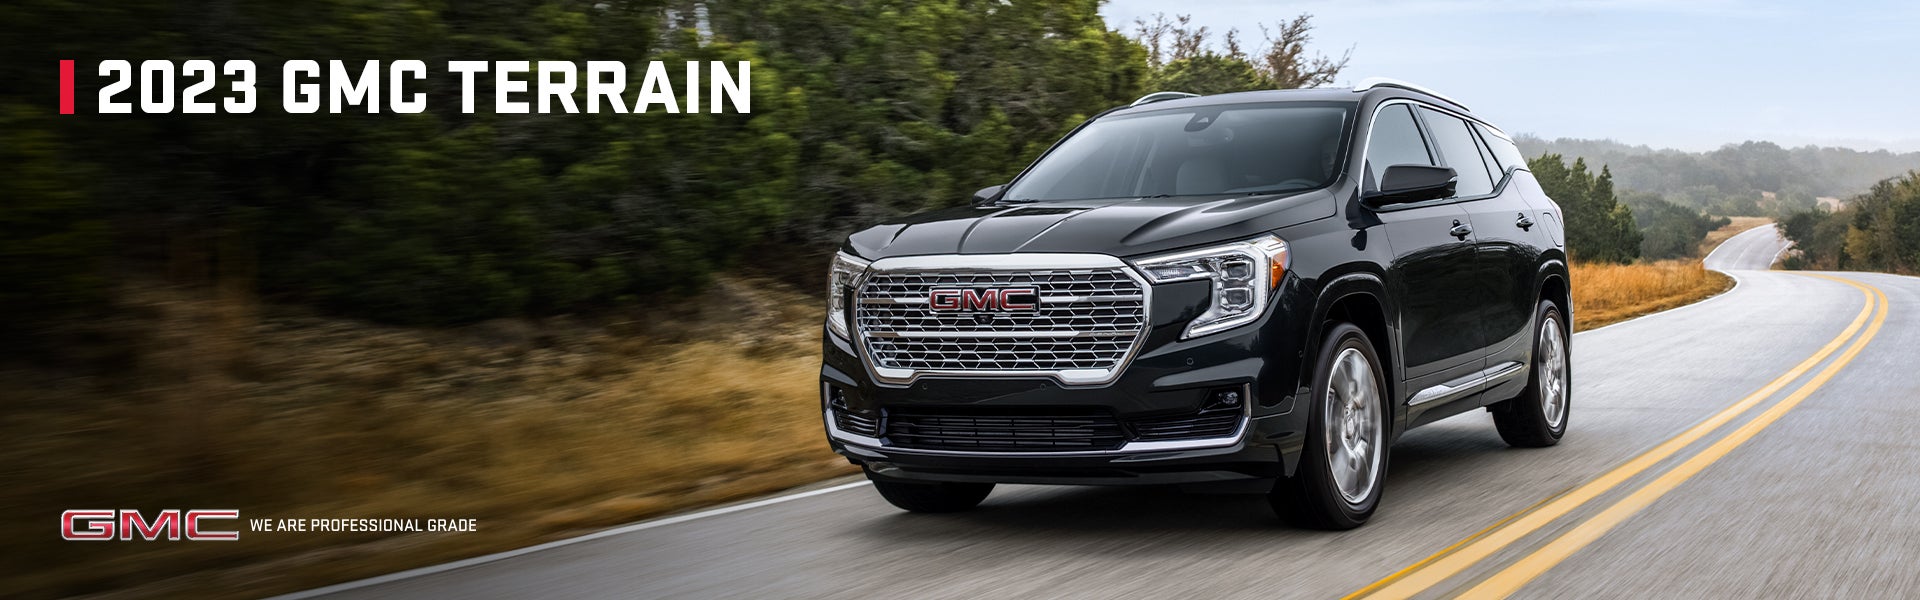 2023 GMC Terrain at Lynch Buick GMC of West Bend in West Bend, WI